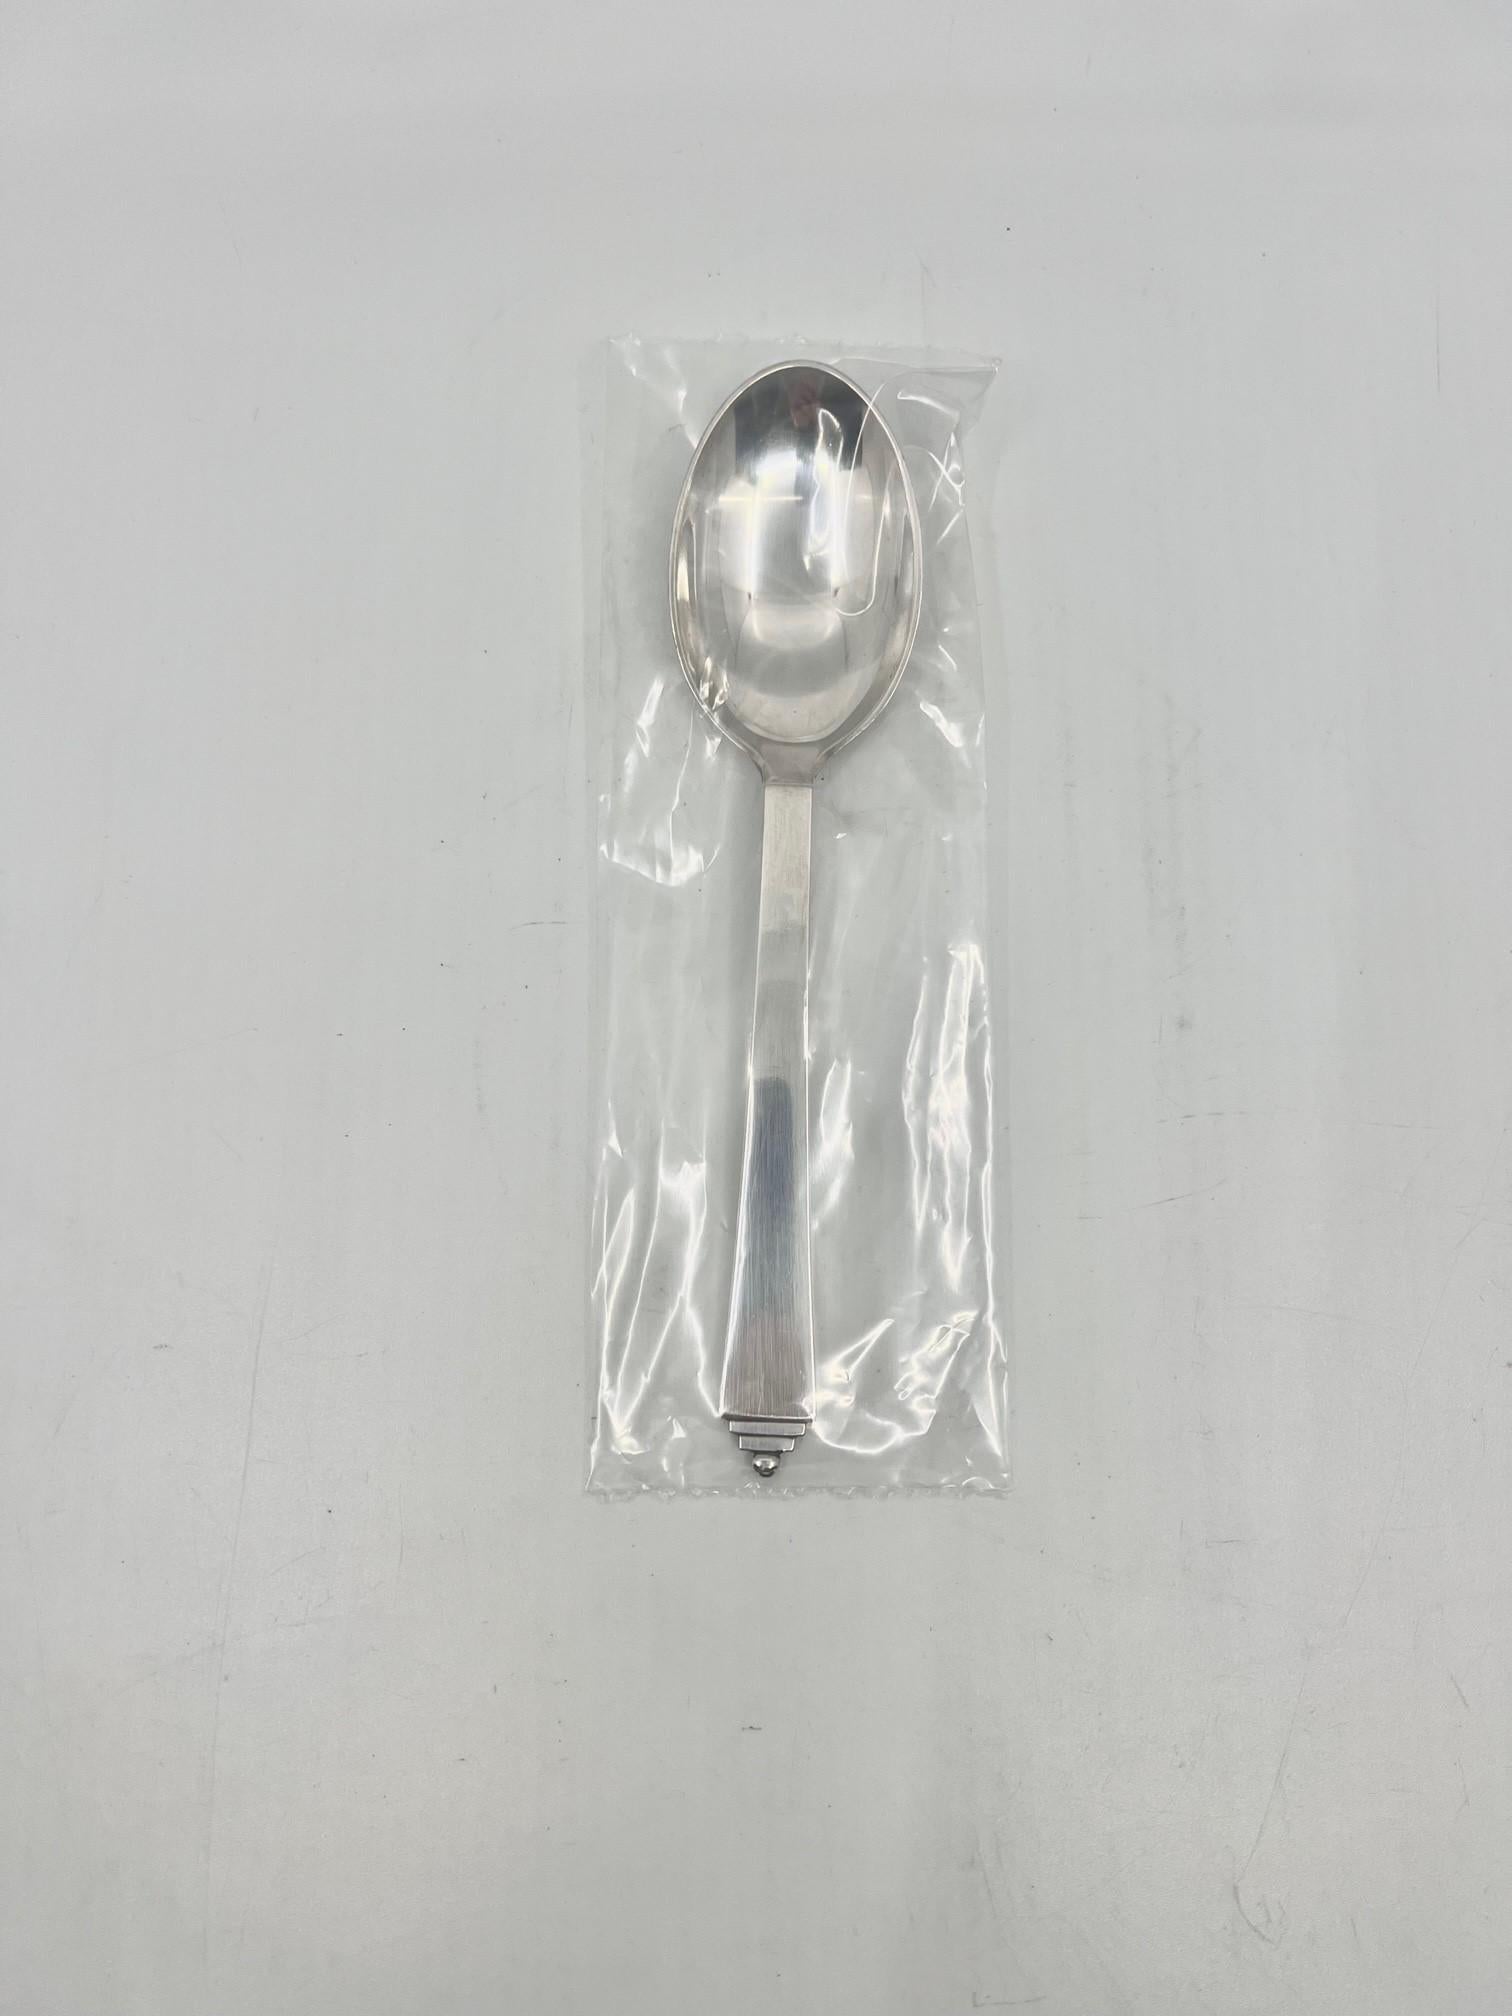 A sterling silver Georg Jensen dessert spoon, item 021 in the Pyramid pattern, design #15 by Harald Nielsen from 1926.

Additional information:
Material: Sterling silver
Styles: Art Deco
Hallmarks: We currently have many of these spoons, most of